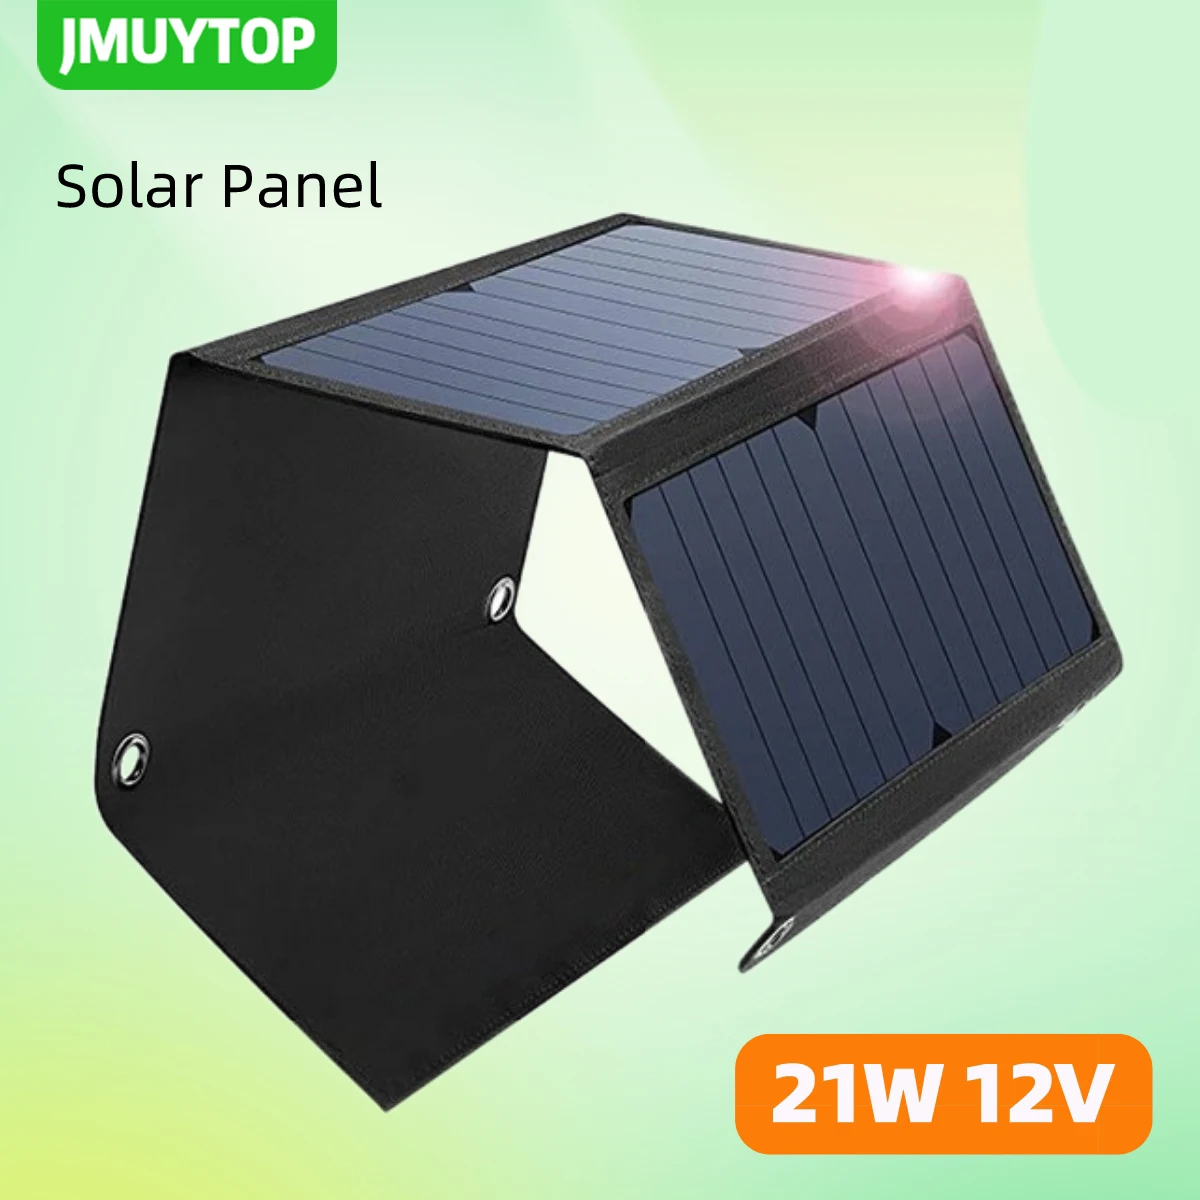 Camping Solar Panel Foldable Portable Lightweight Solar Charger USB DC out 18V 28W 21W Power Emergency Generator Outdoor Hiking